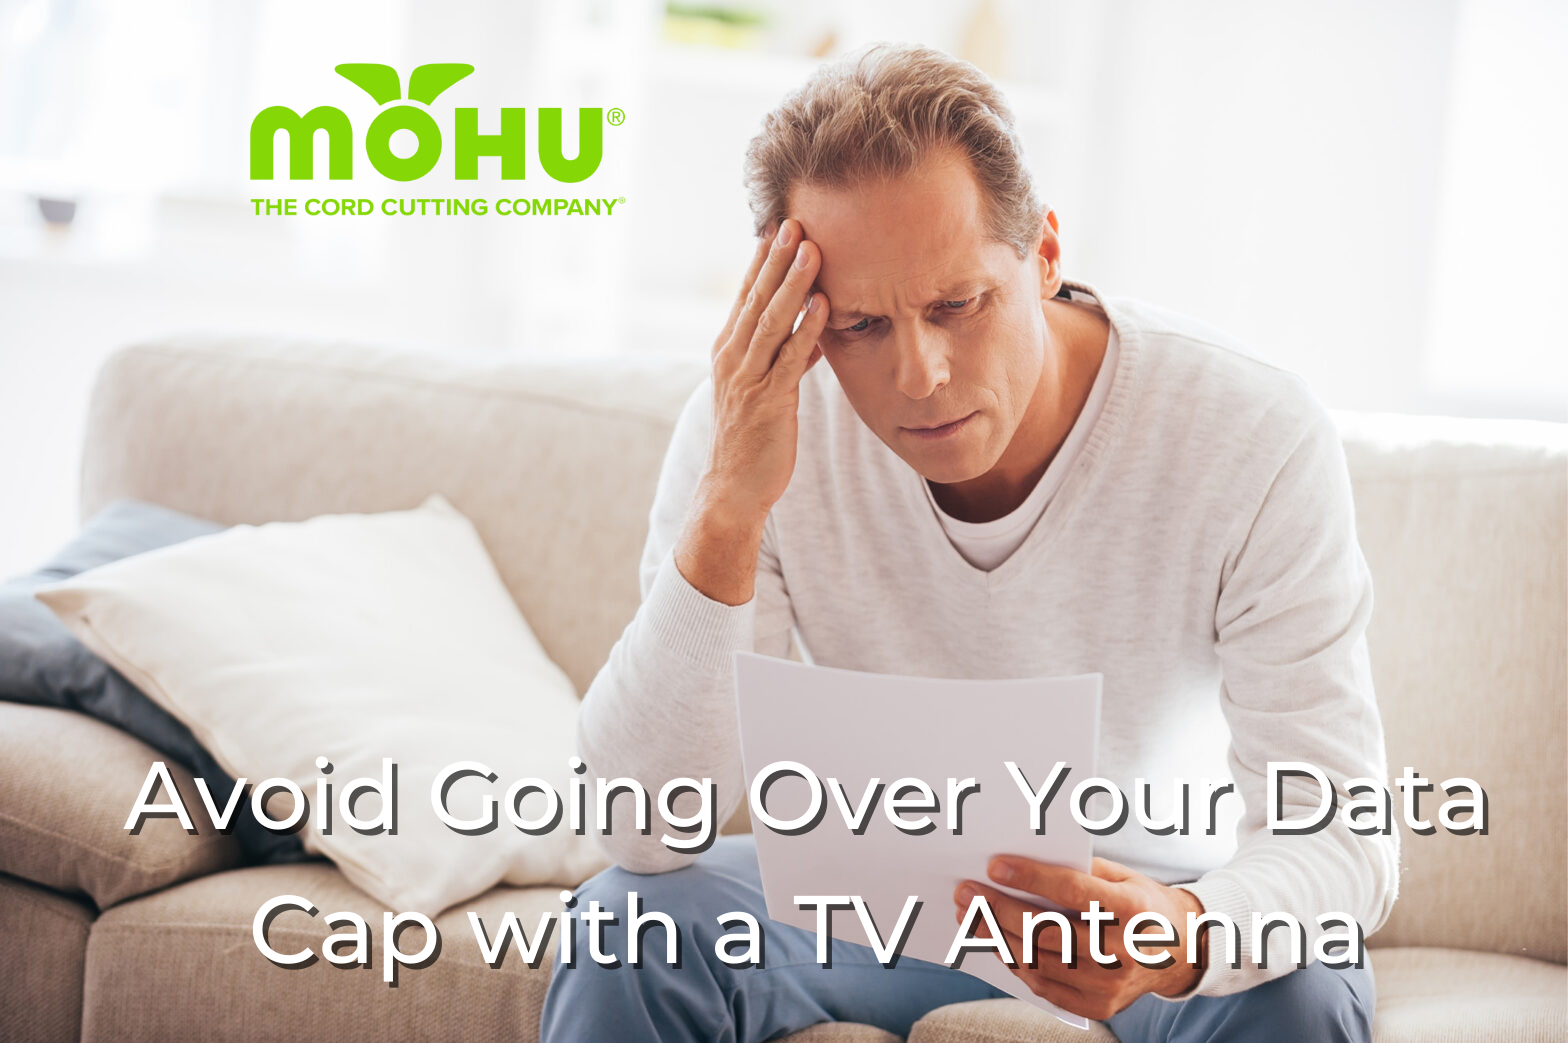 Avoid Going Over Your Data Cap with a TV Antenna, man sitting on couch looking upset with bill in his hands, mohu logo